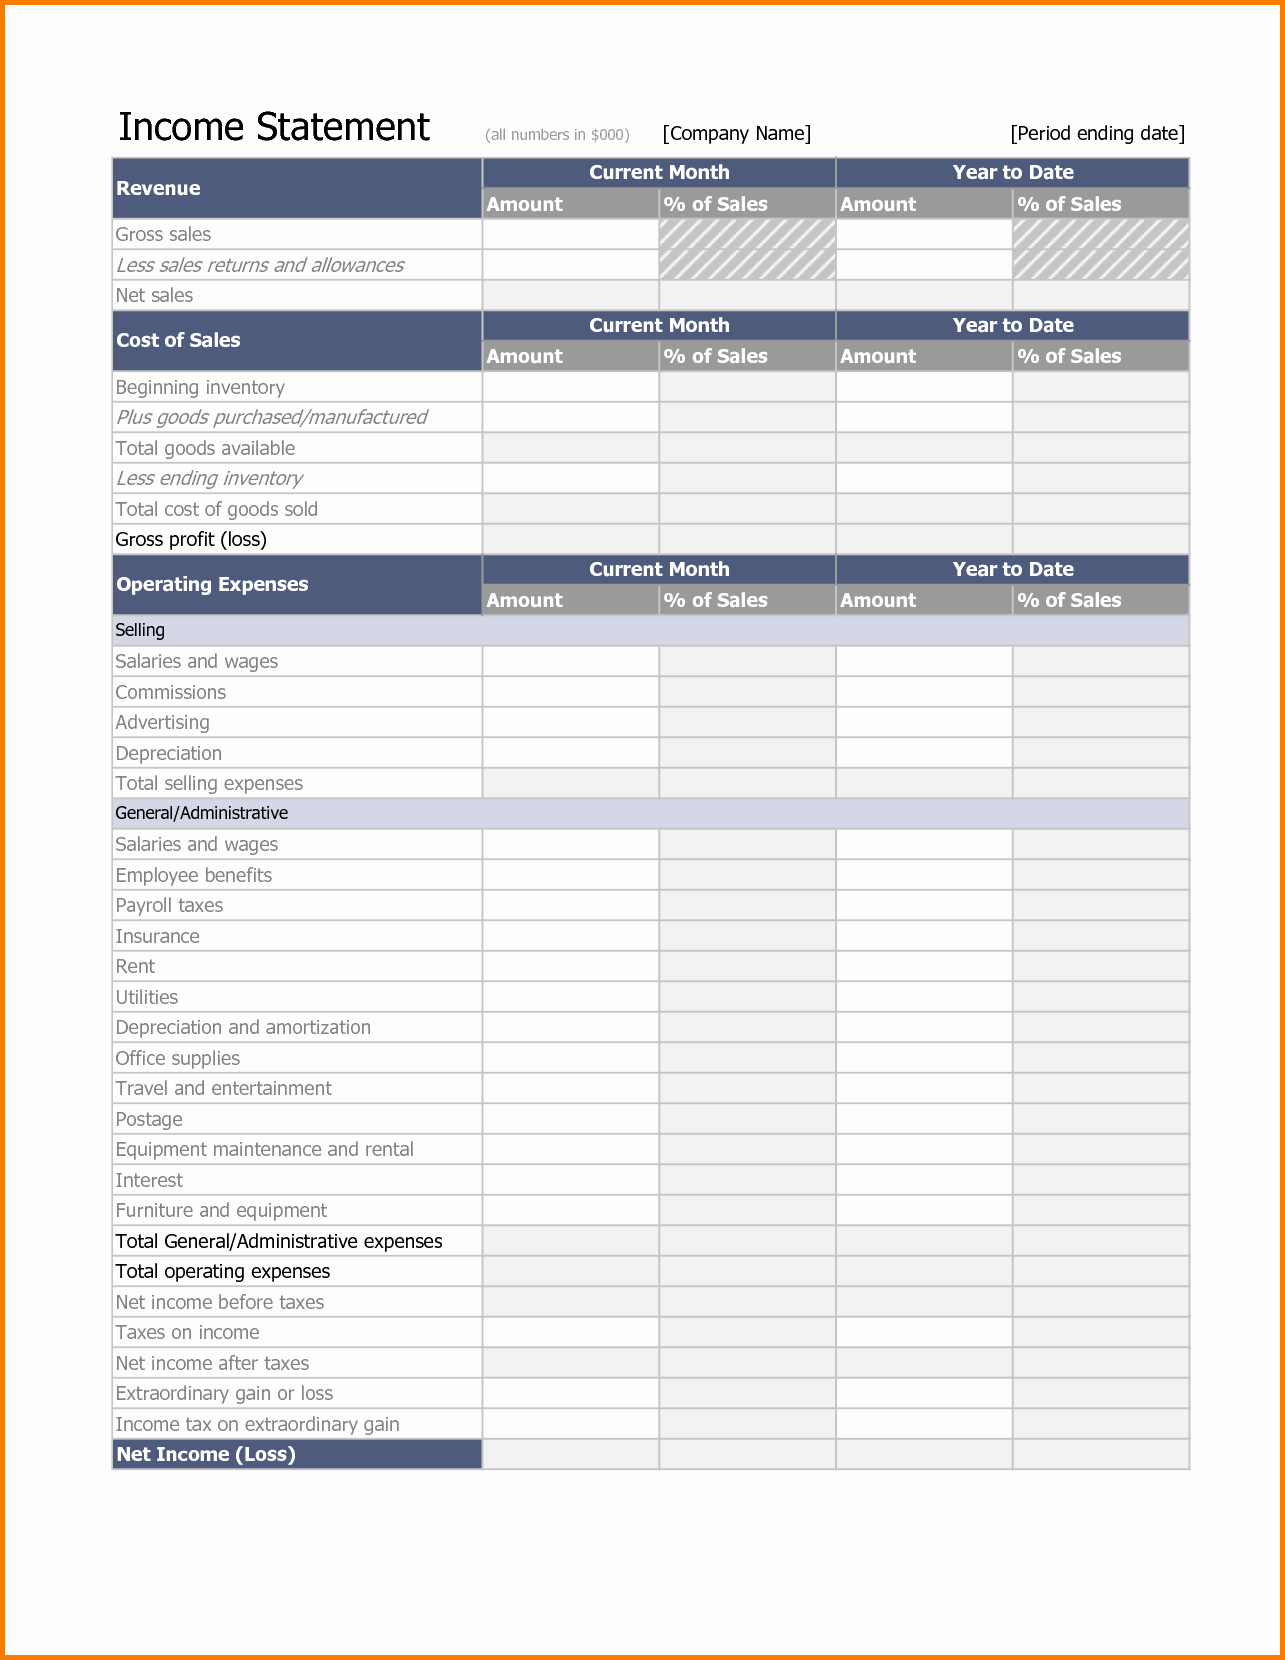 Income Statement Excel Template Inspirational 10 Personal Financial Statement Excel